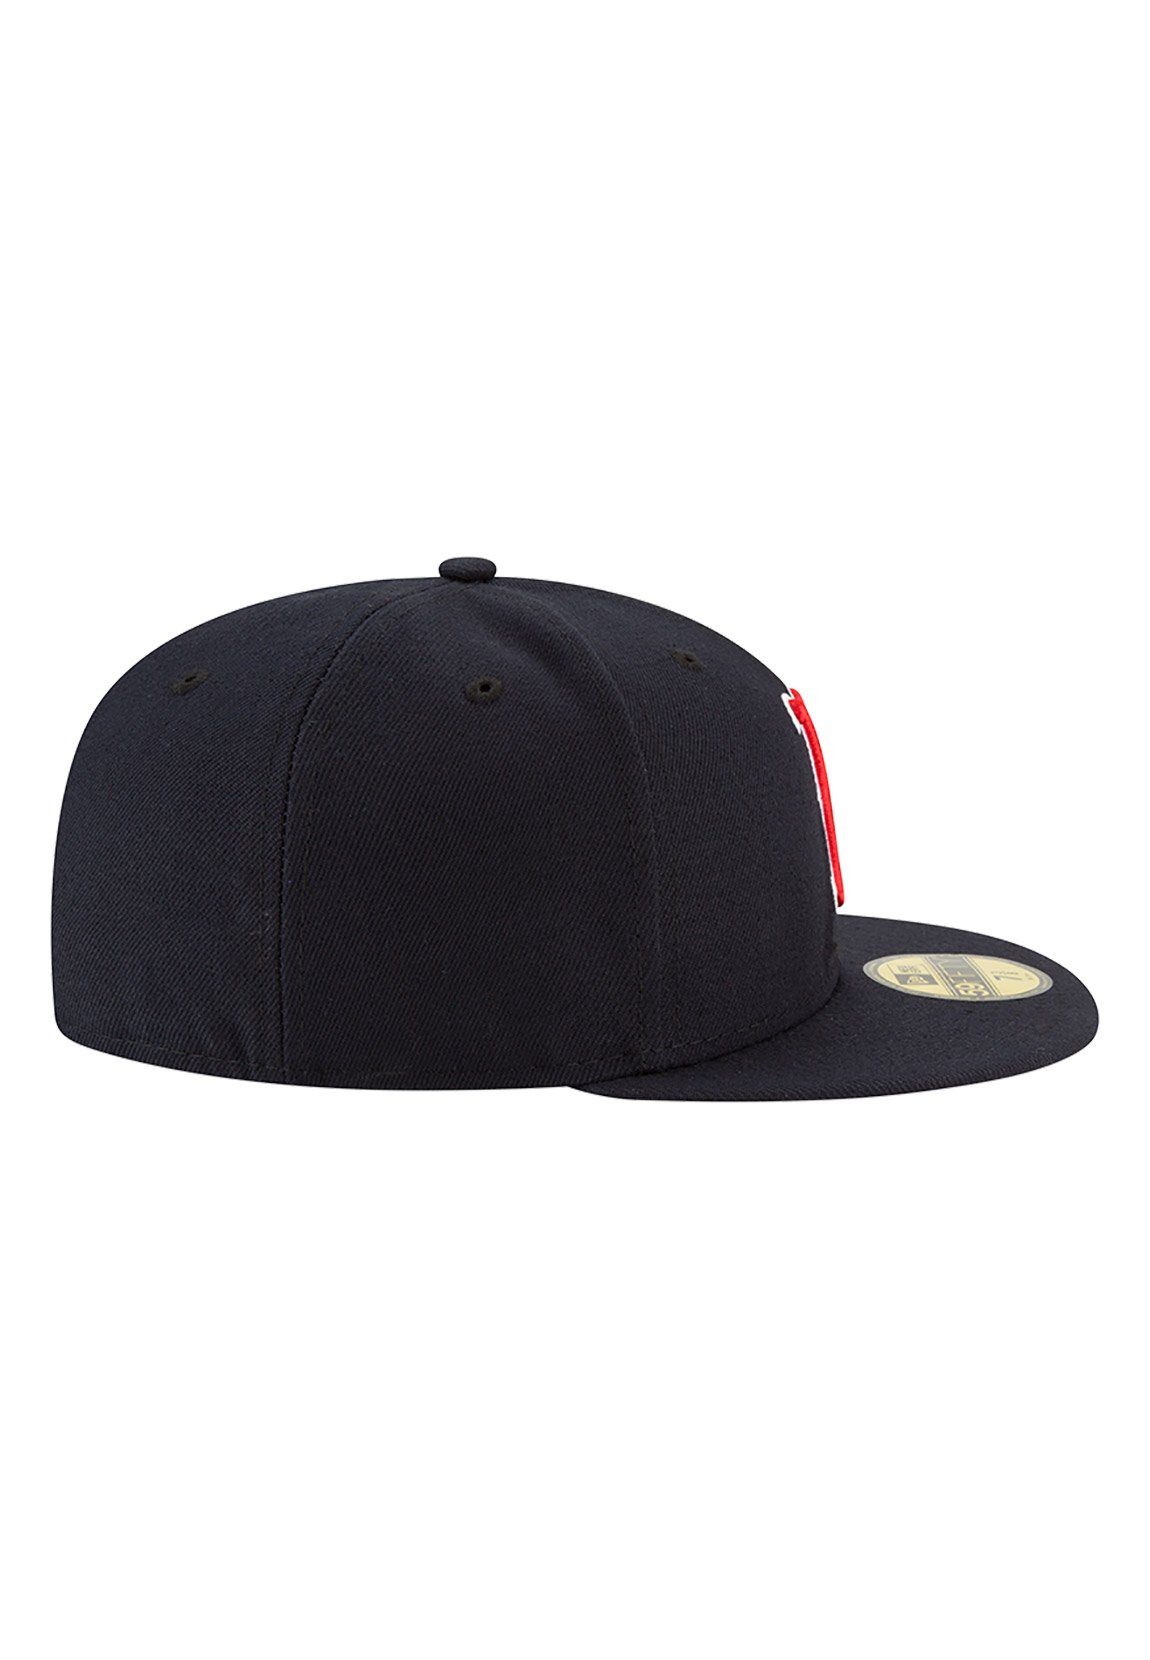 New Dunkelblau Cap New 59Fifty Authentics Rot Fitted Fitted Era RED Cap SOX BOSTON Era